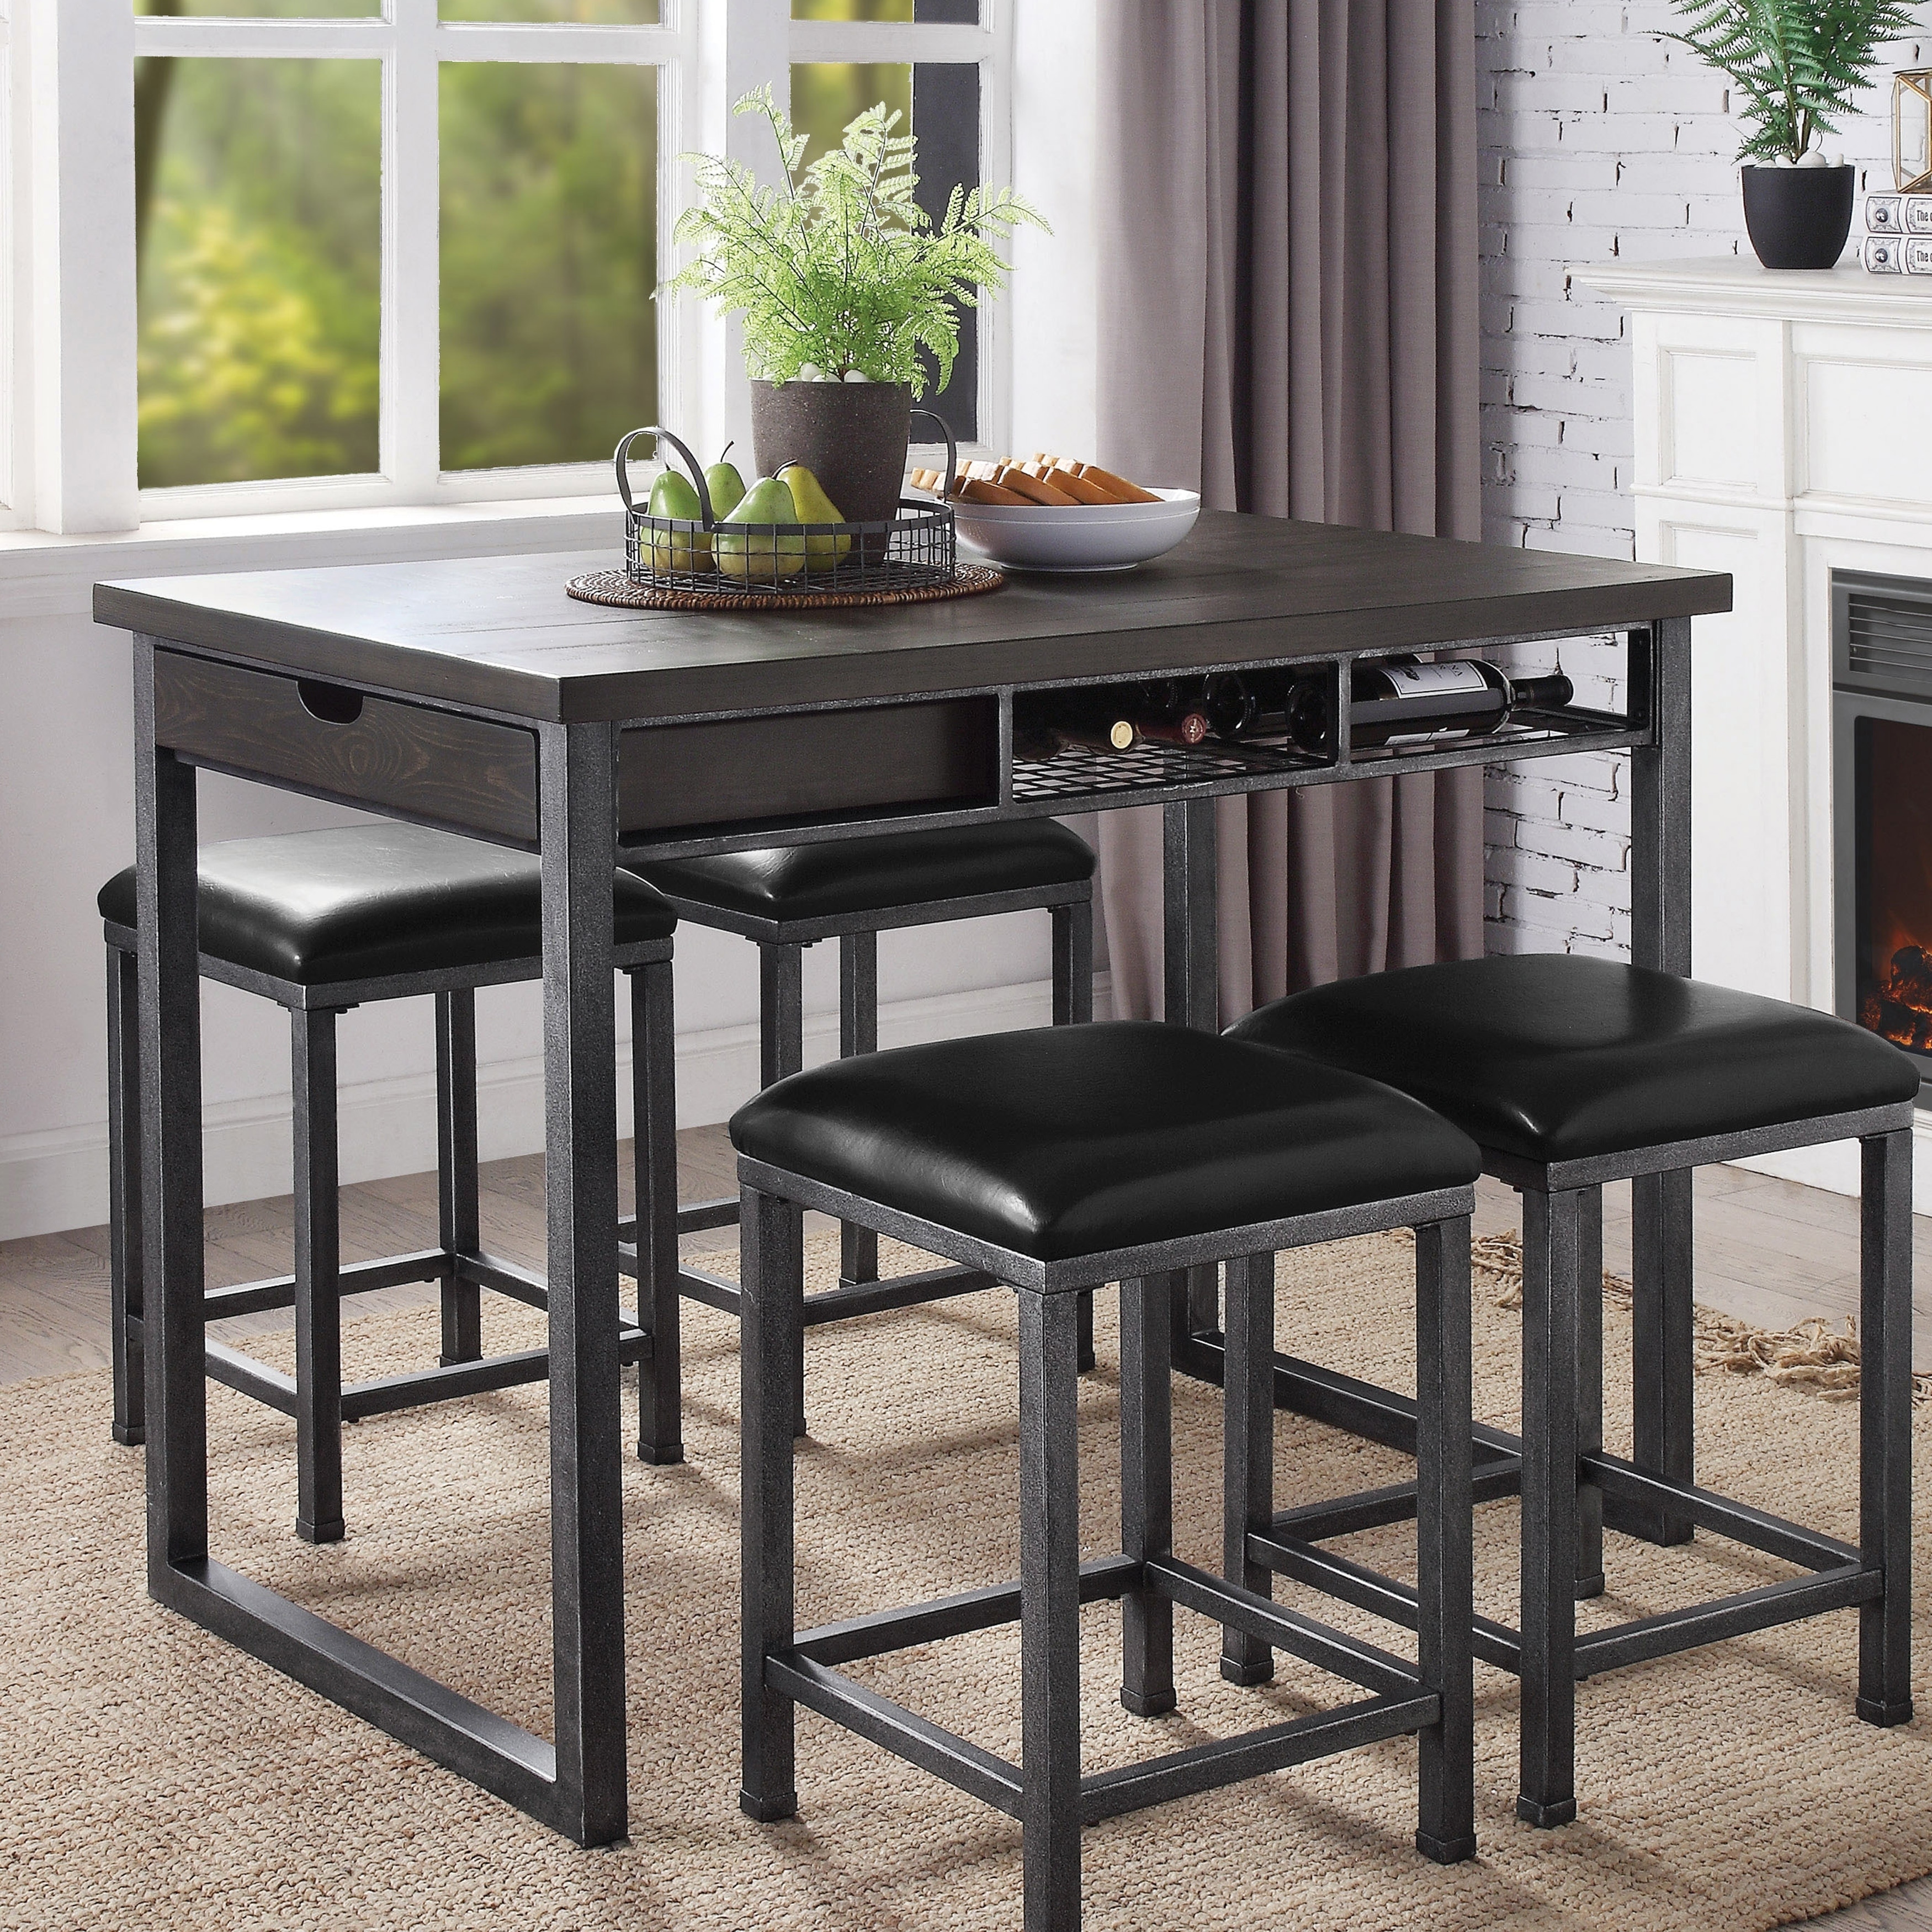 Dining Table With Storage